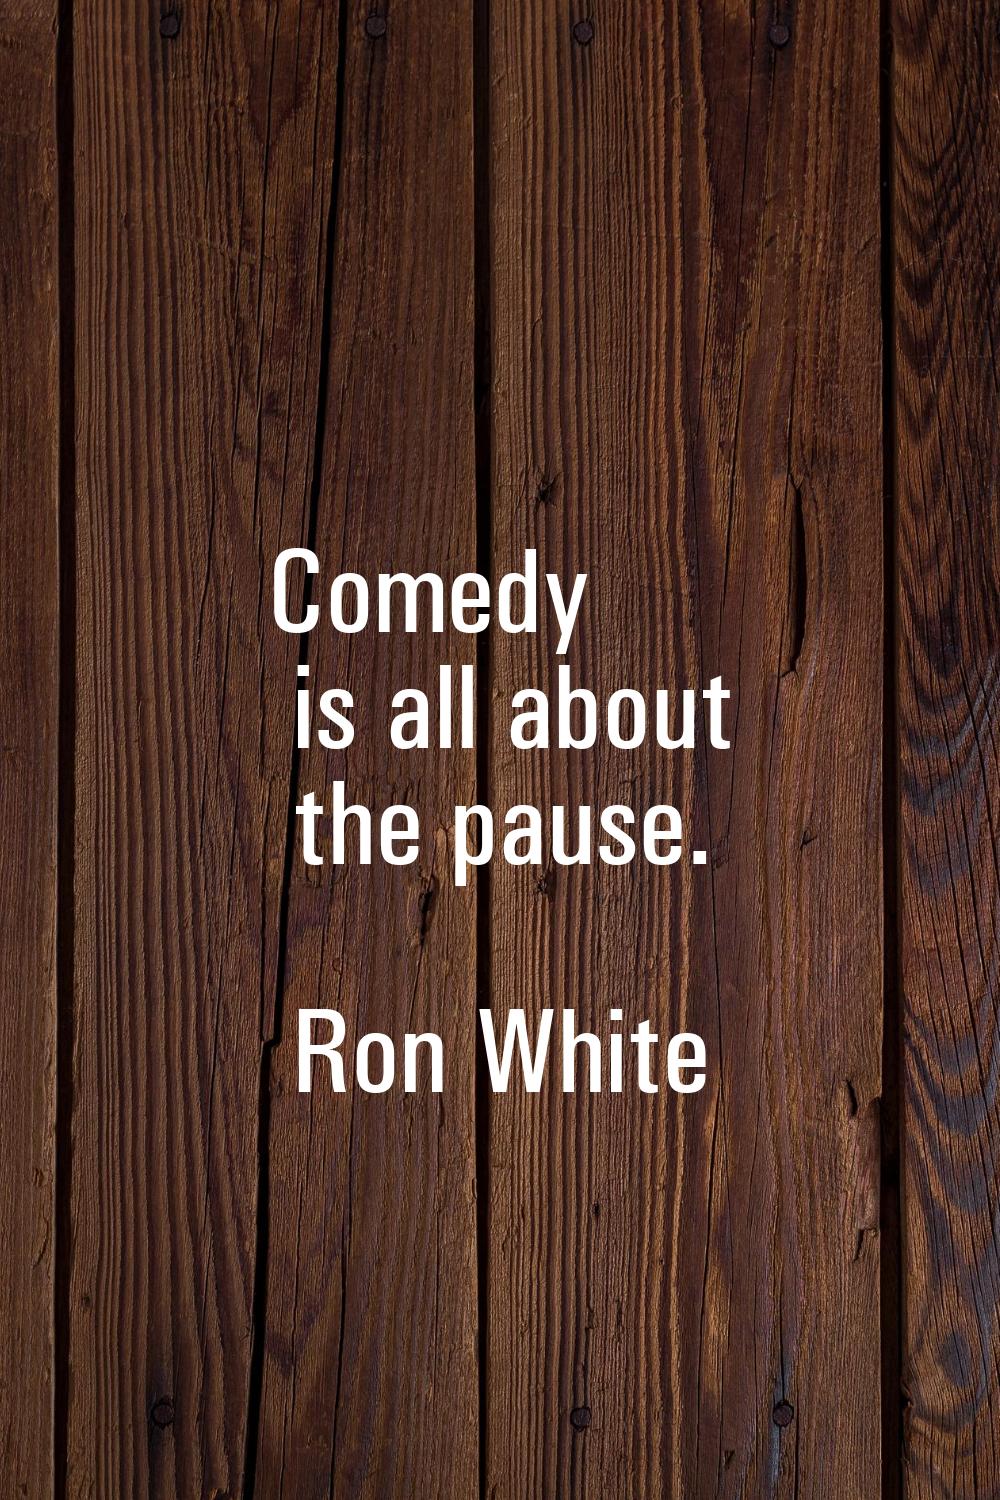 Comedy is all about the pause.